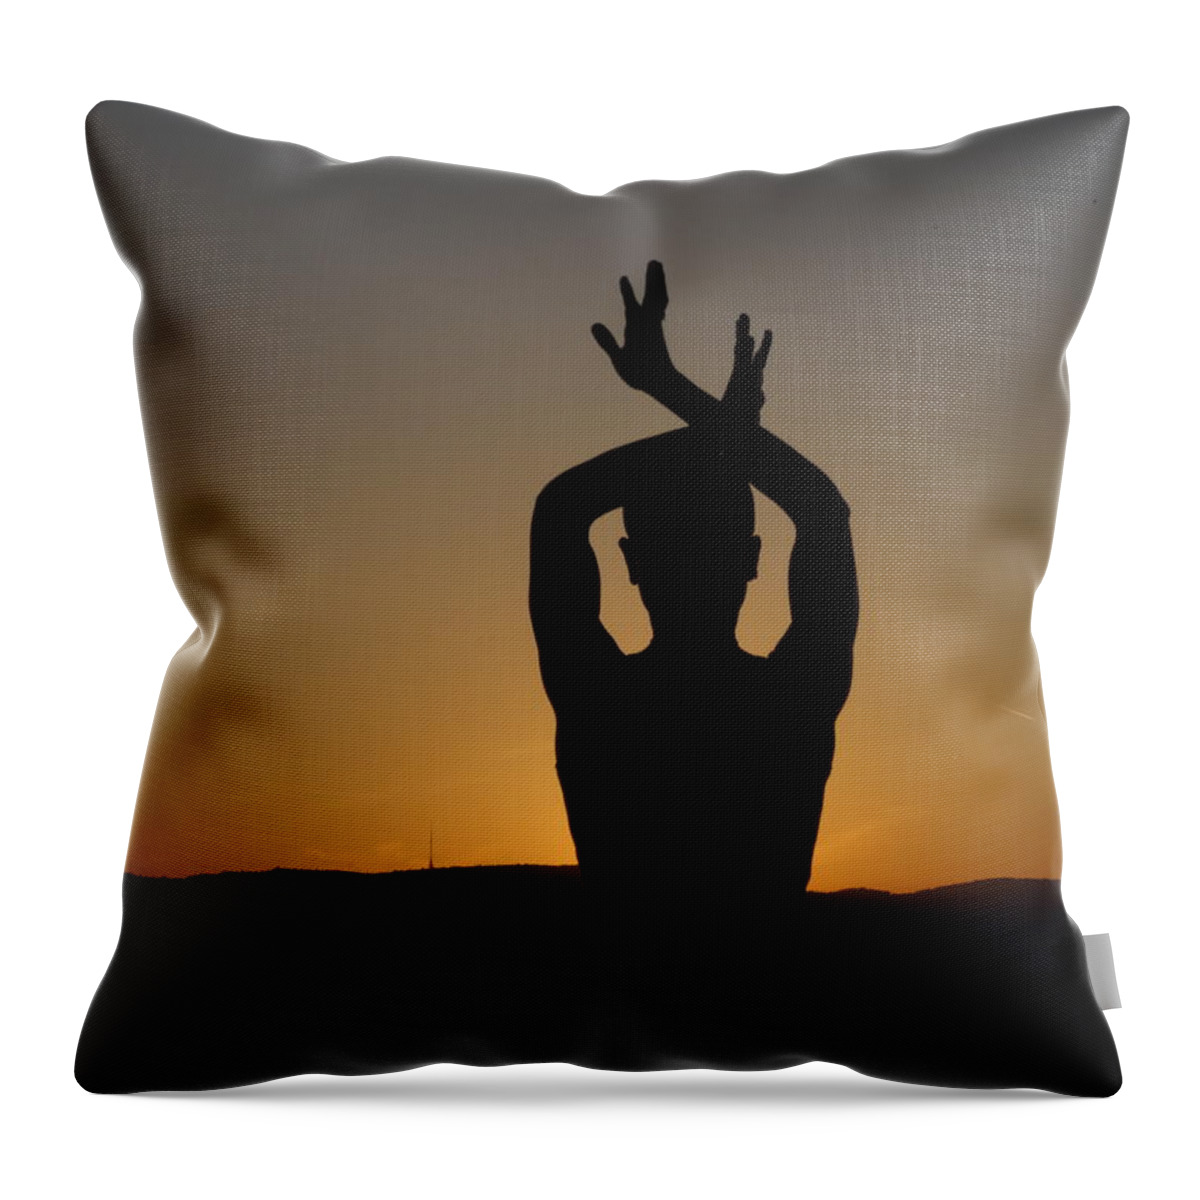 Sunset Throw Pillow featuring the photograph Inner Peace by Tanja Leuenberger